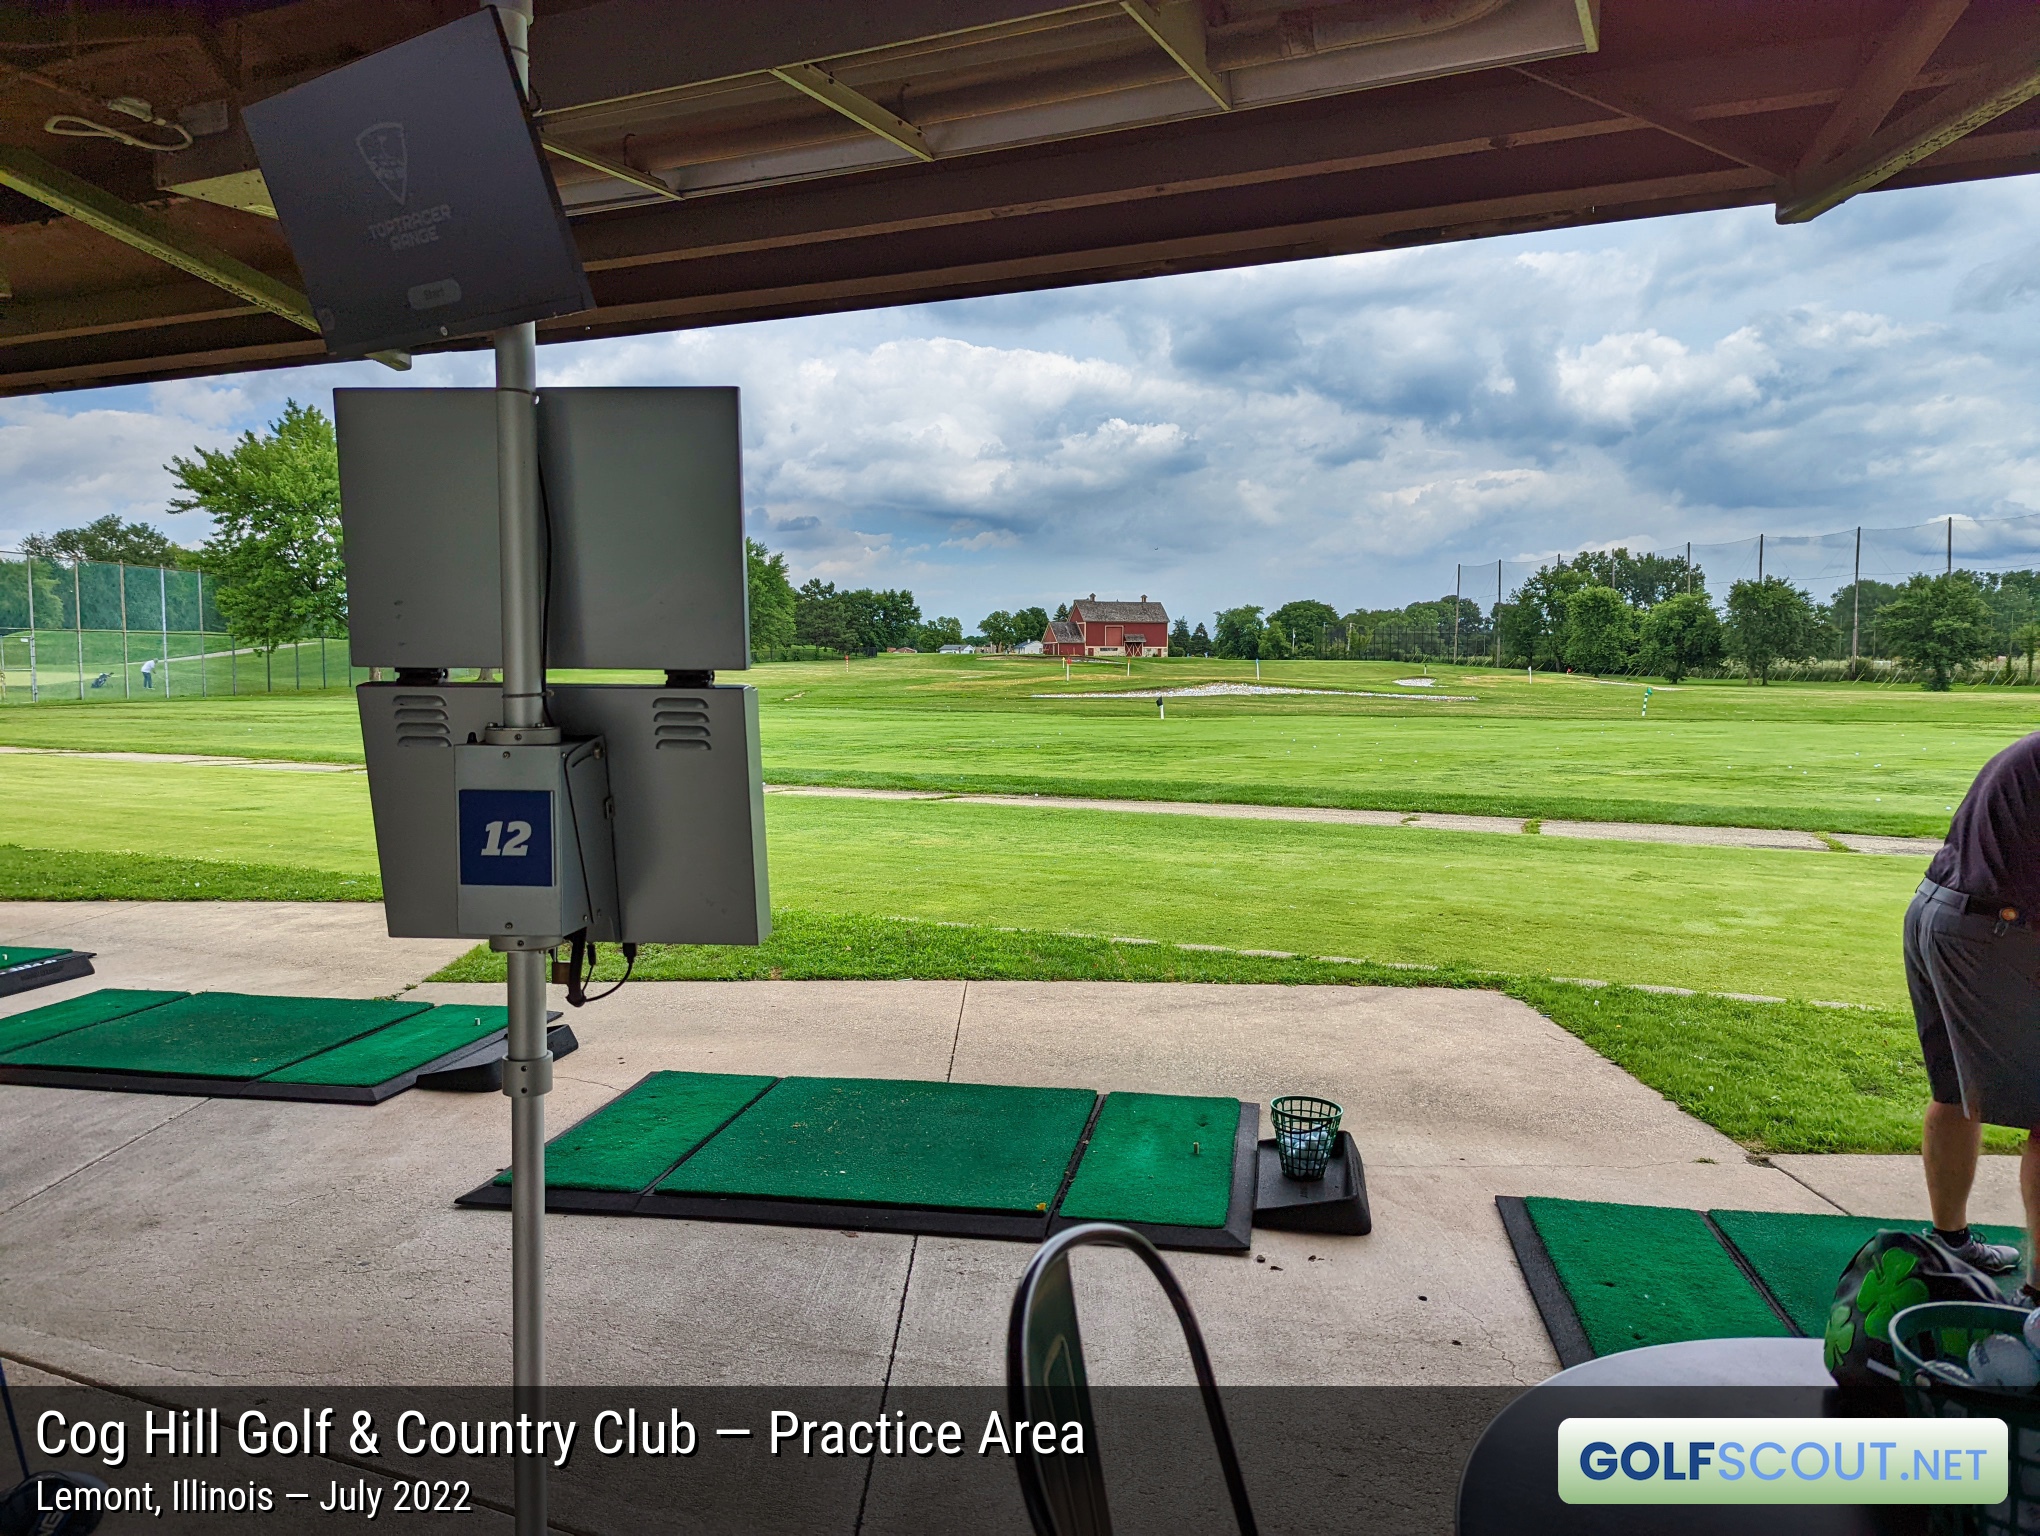 Photo of the practice area at Cog Hill Course #4 - Dubsdread in Lemont, Illinois. The mats at the Cog Hill driving range.